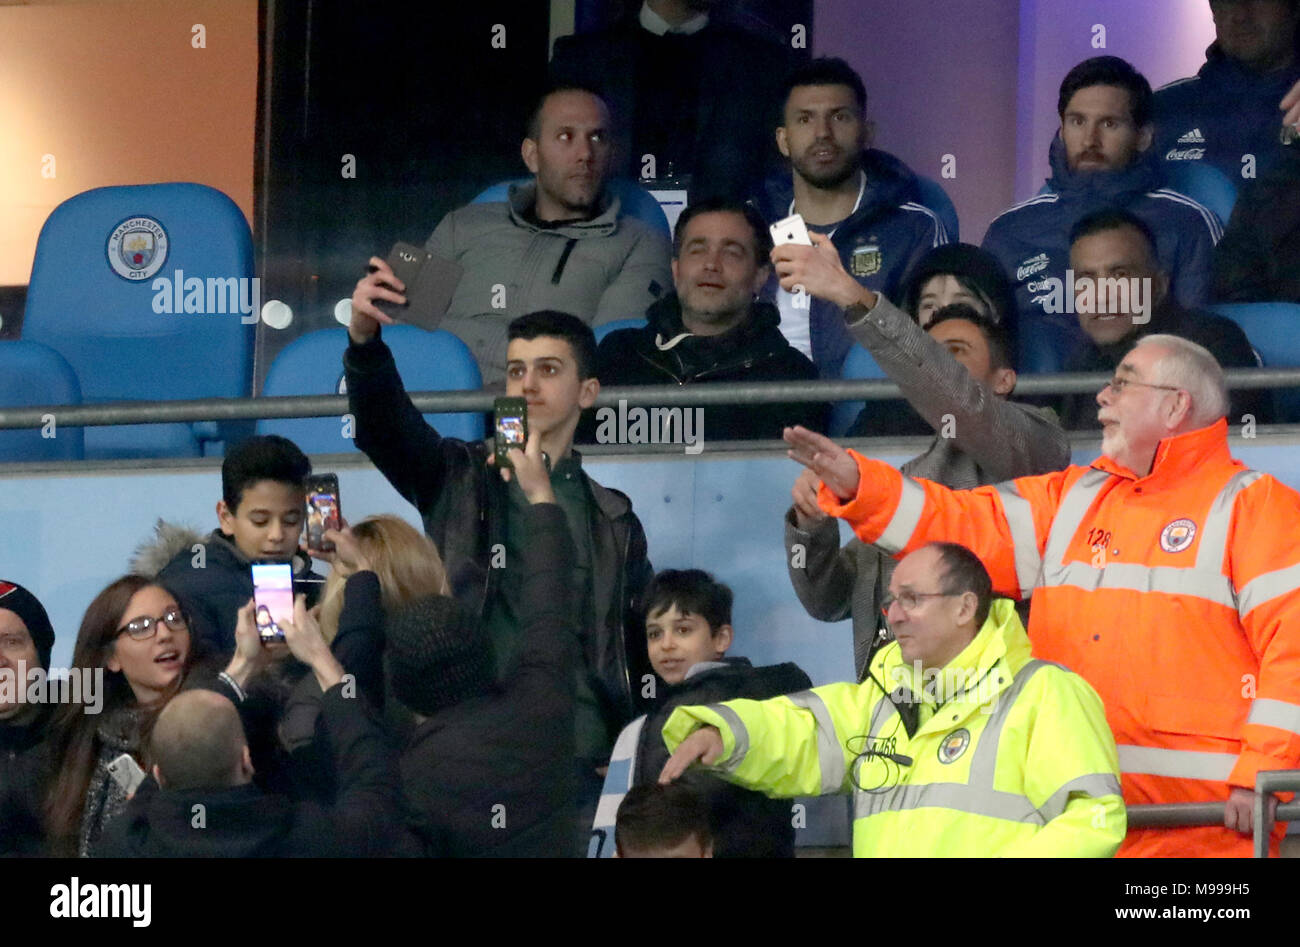 Fans in the stands take photos of Lionel Messi and Sergio Aguero as stewards attempt to stop them during the international friendly match at the Etihad Stadium, Manchester. Stock Photo